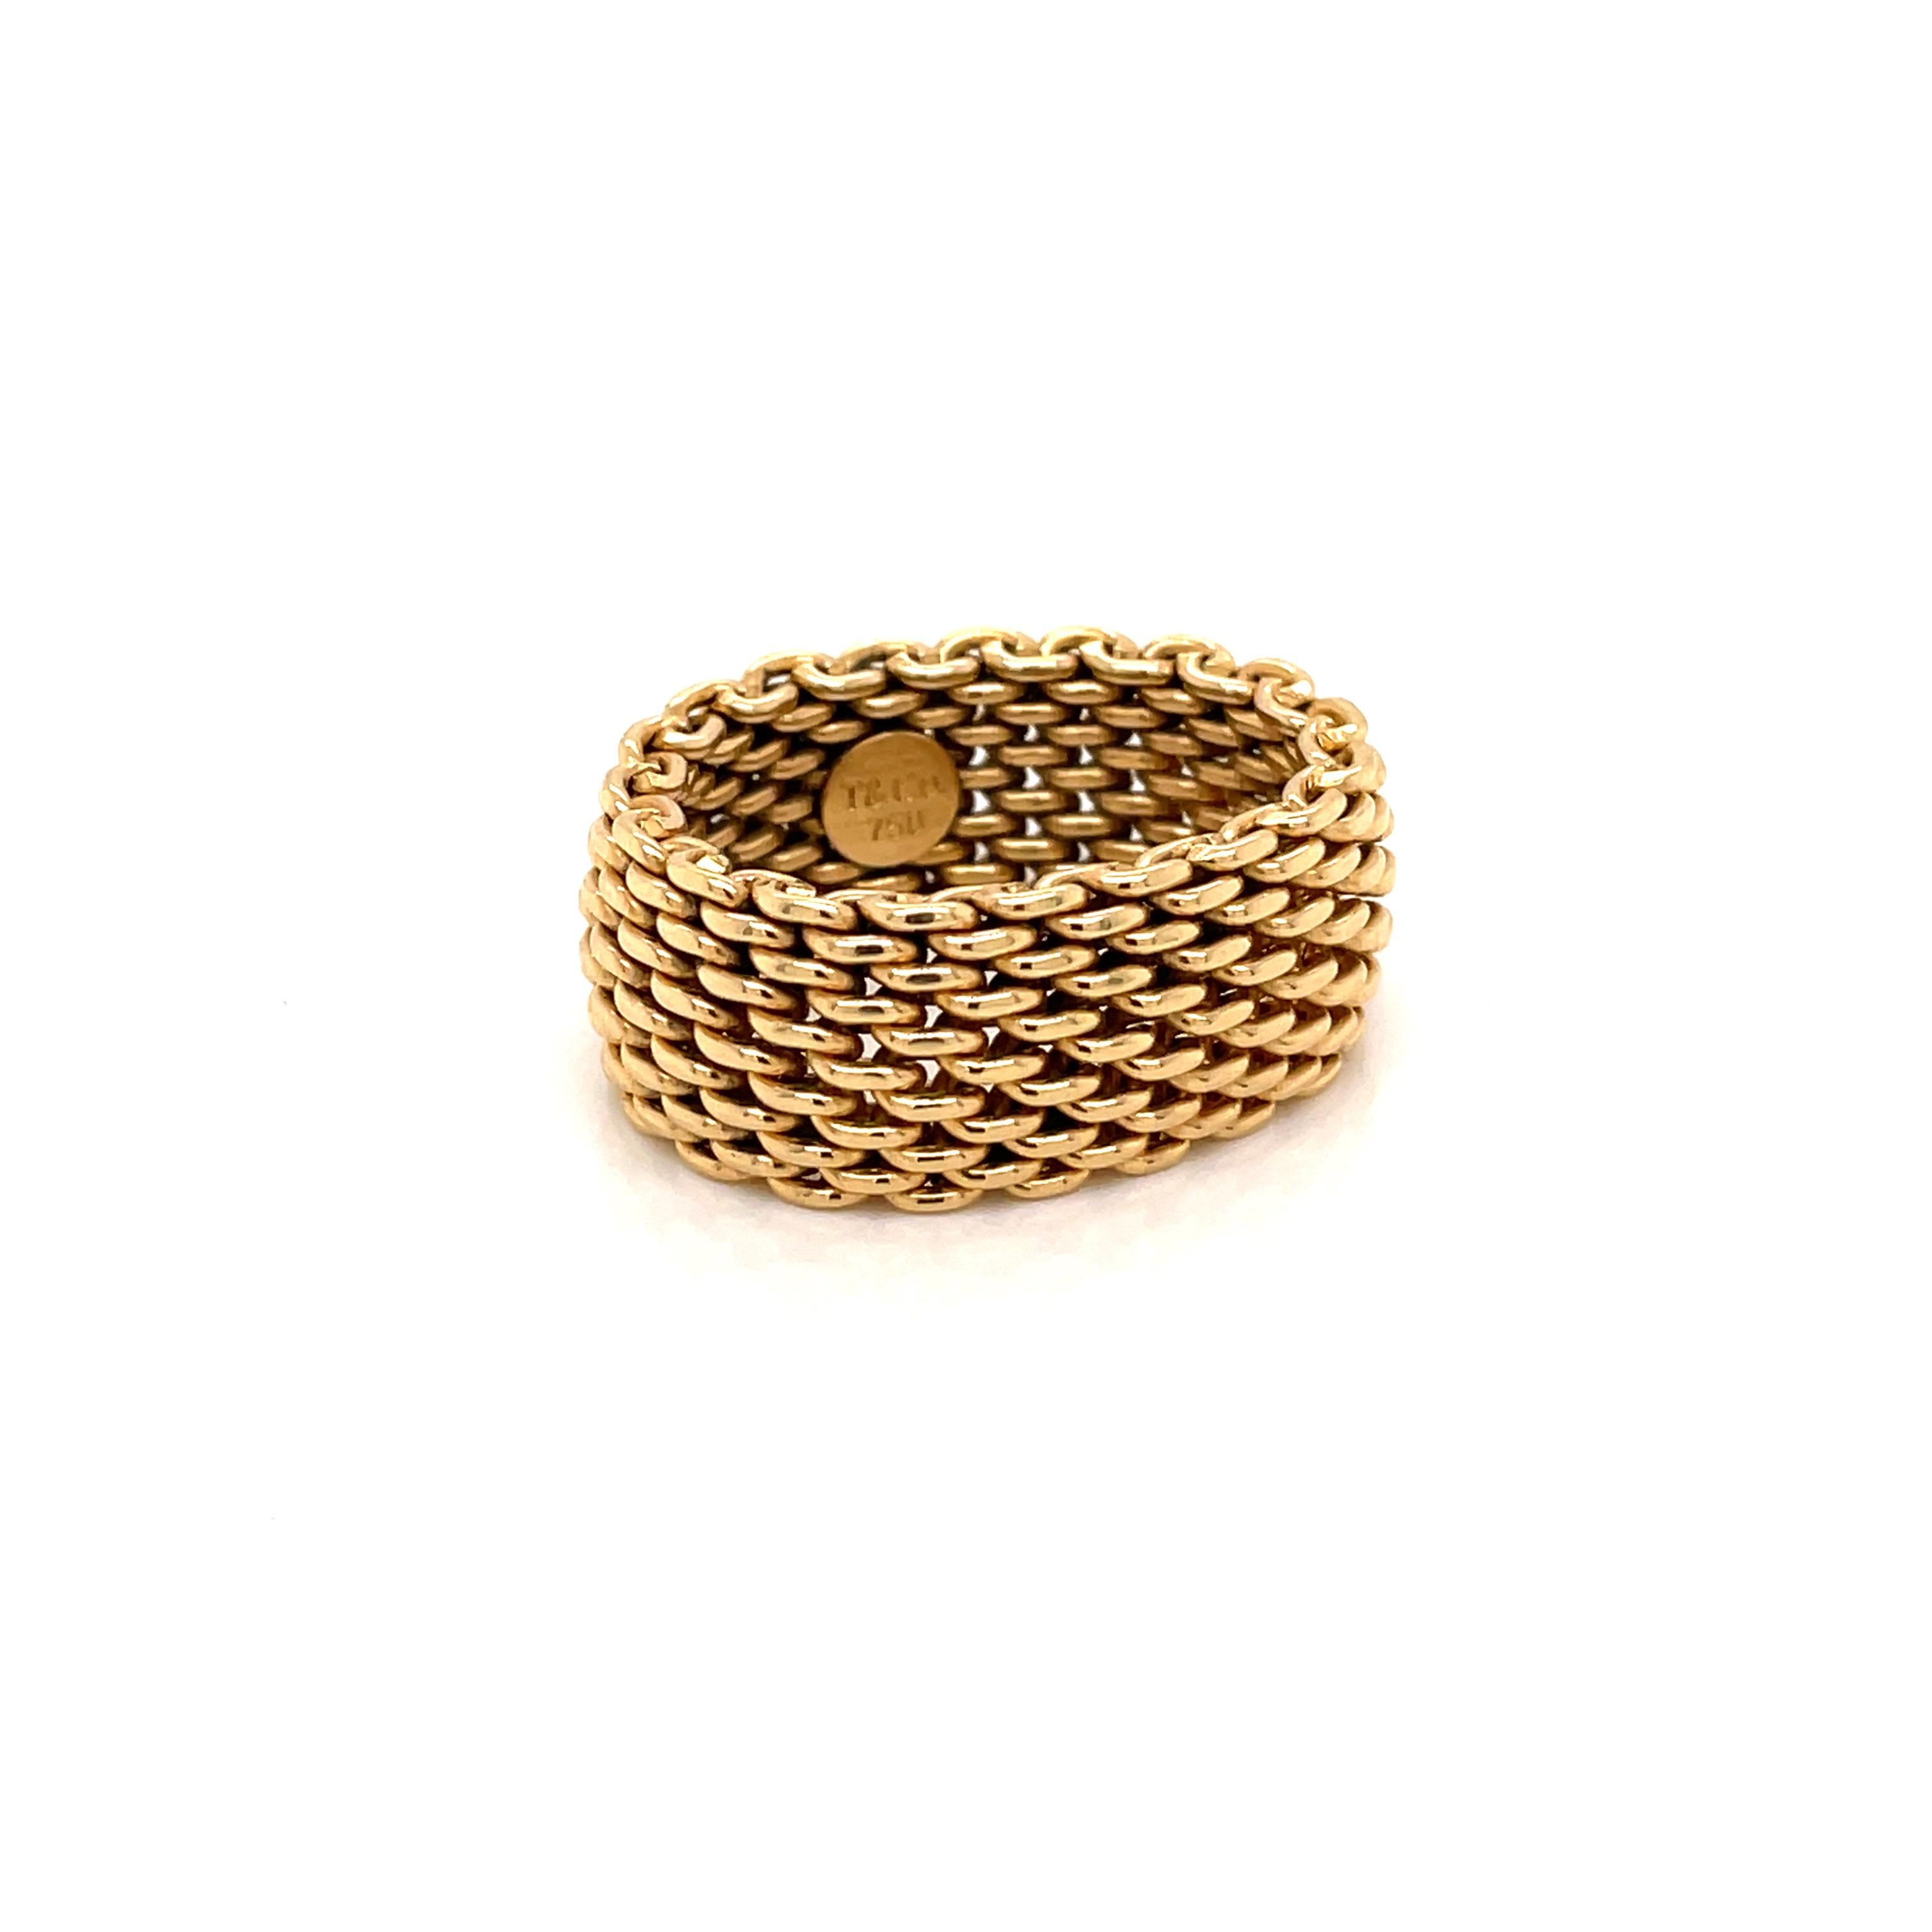 Vintage Tiffany & Co. 18 Karat Gold Mesh Band Flexible Ring. Signed T & Co., with purity marks. Circa 2000's. Size US 8,5
Gross weight: 12,8

Excellent condition, 100% authenticity guarantee, Free appraisal card with purchase